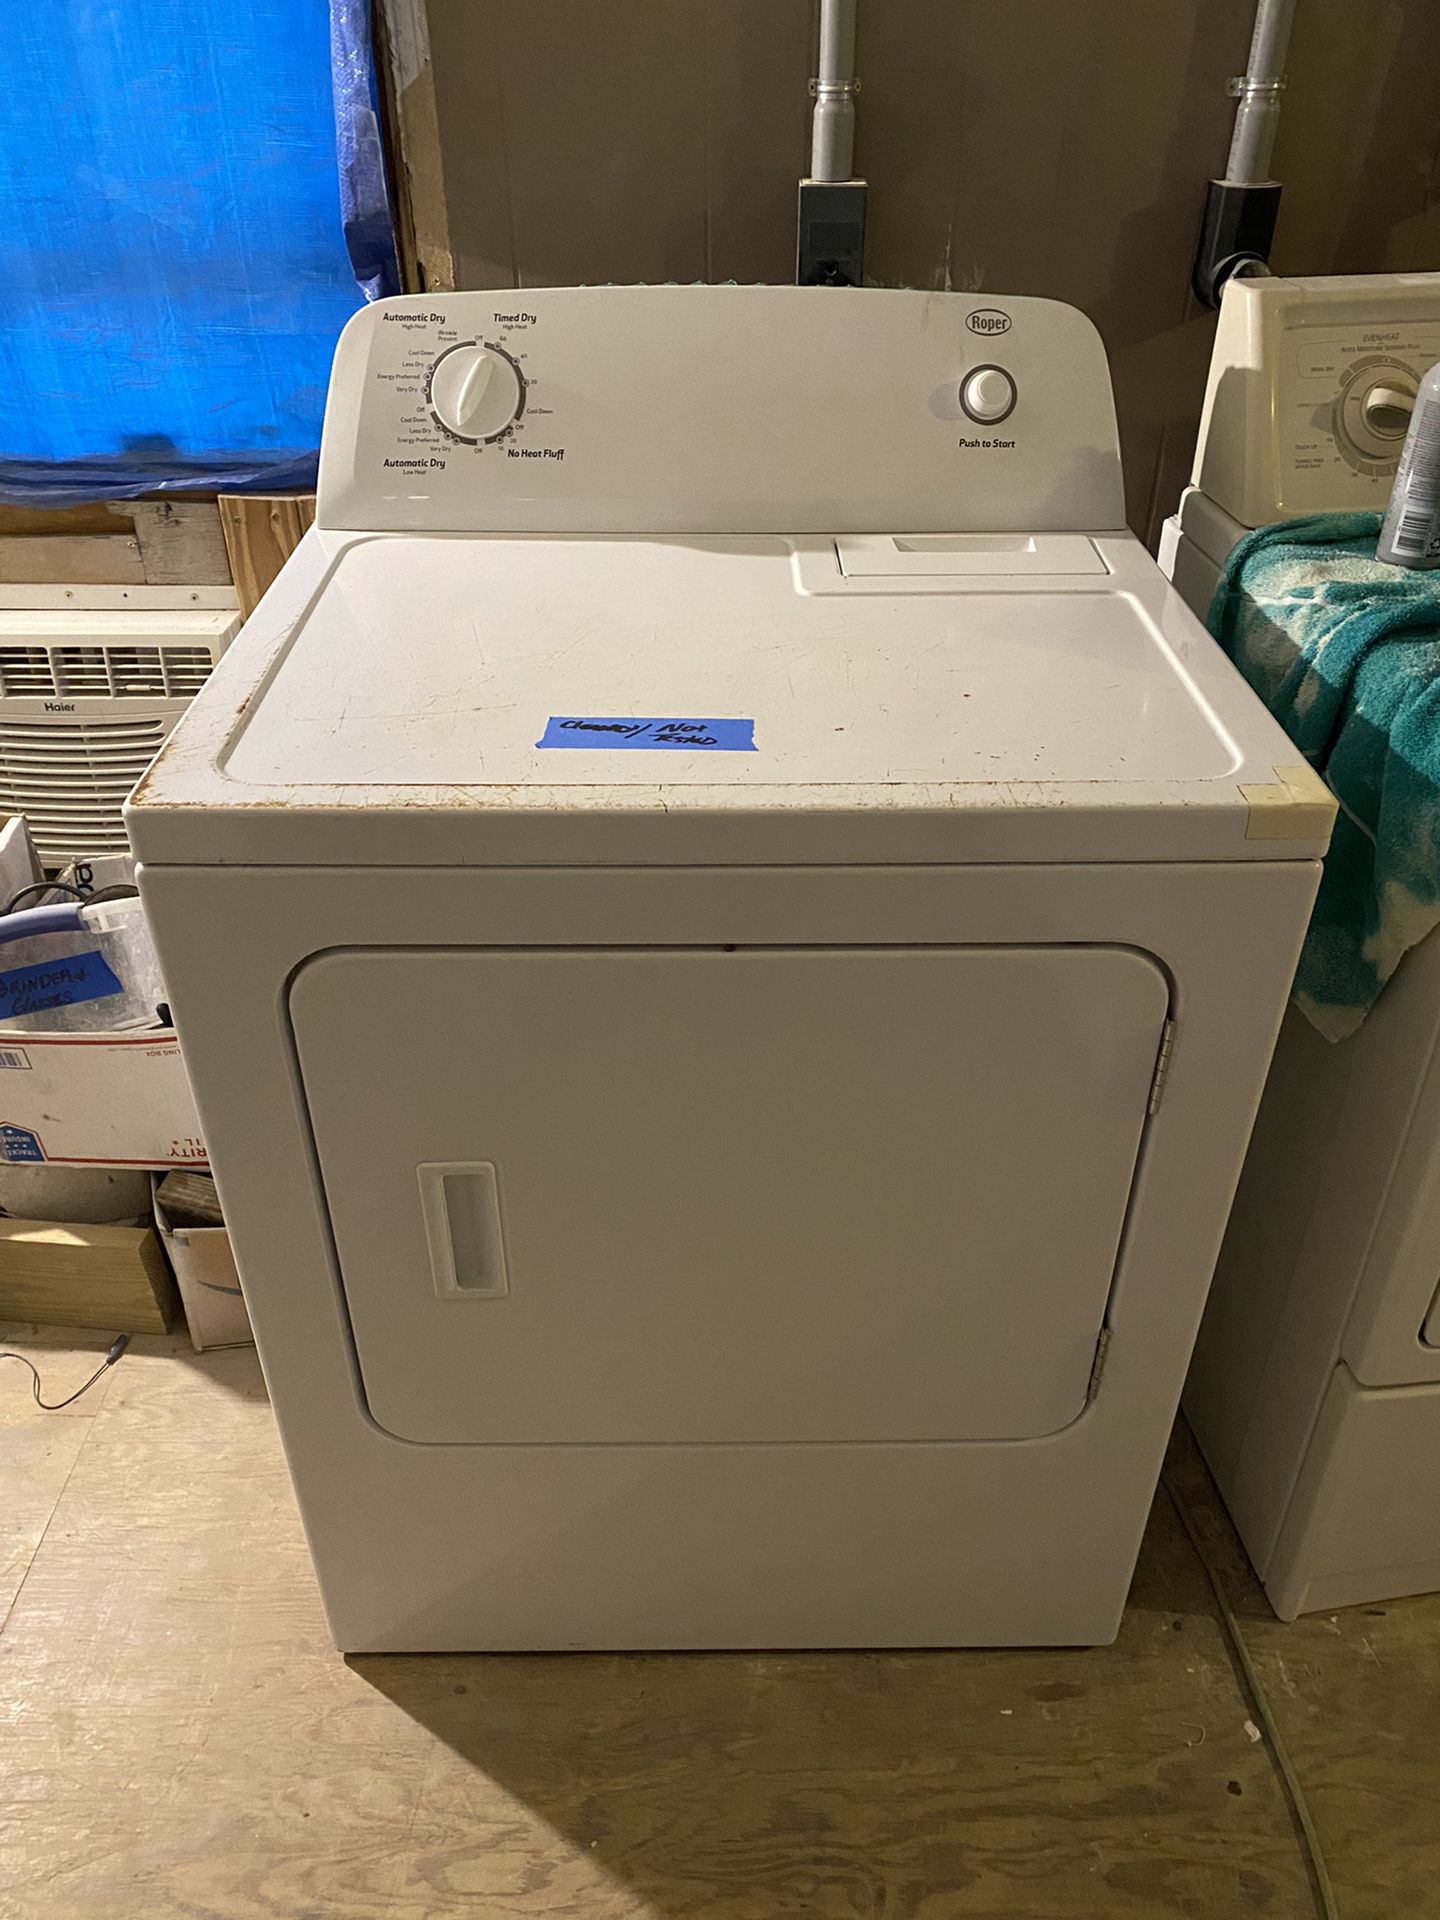 Refurbished Dryer With New Parts